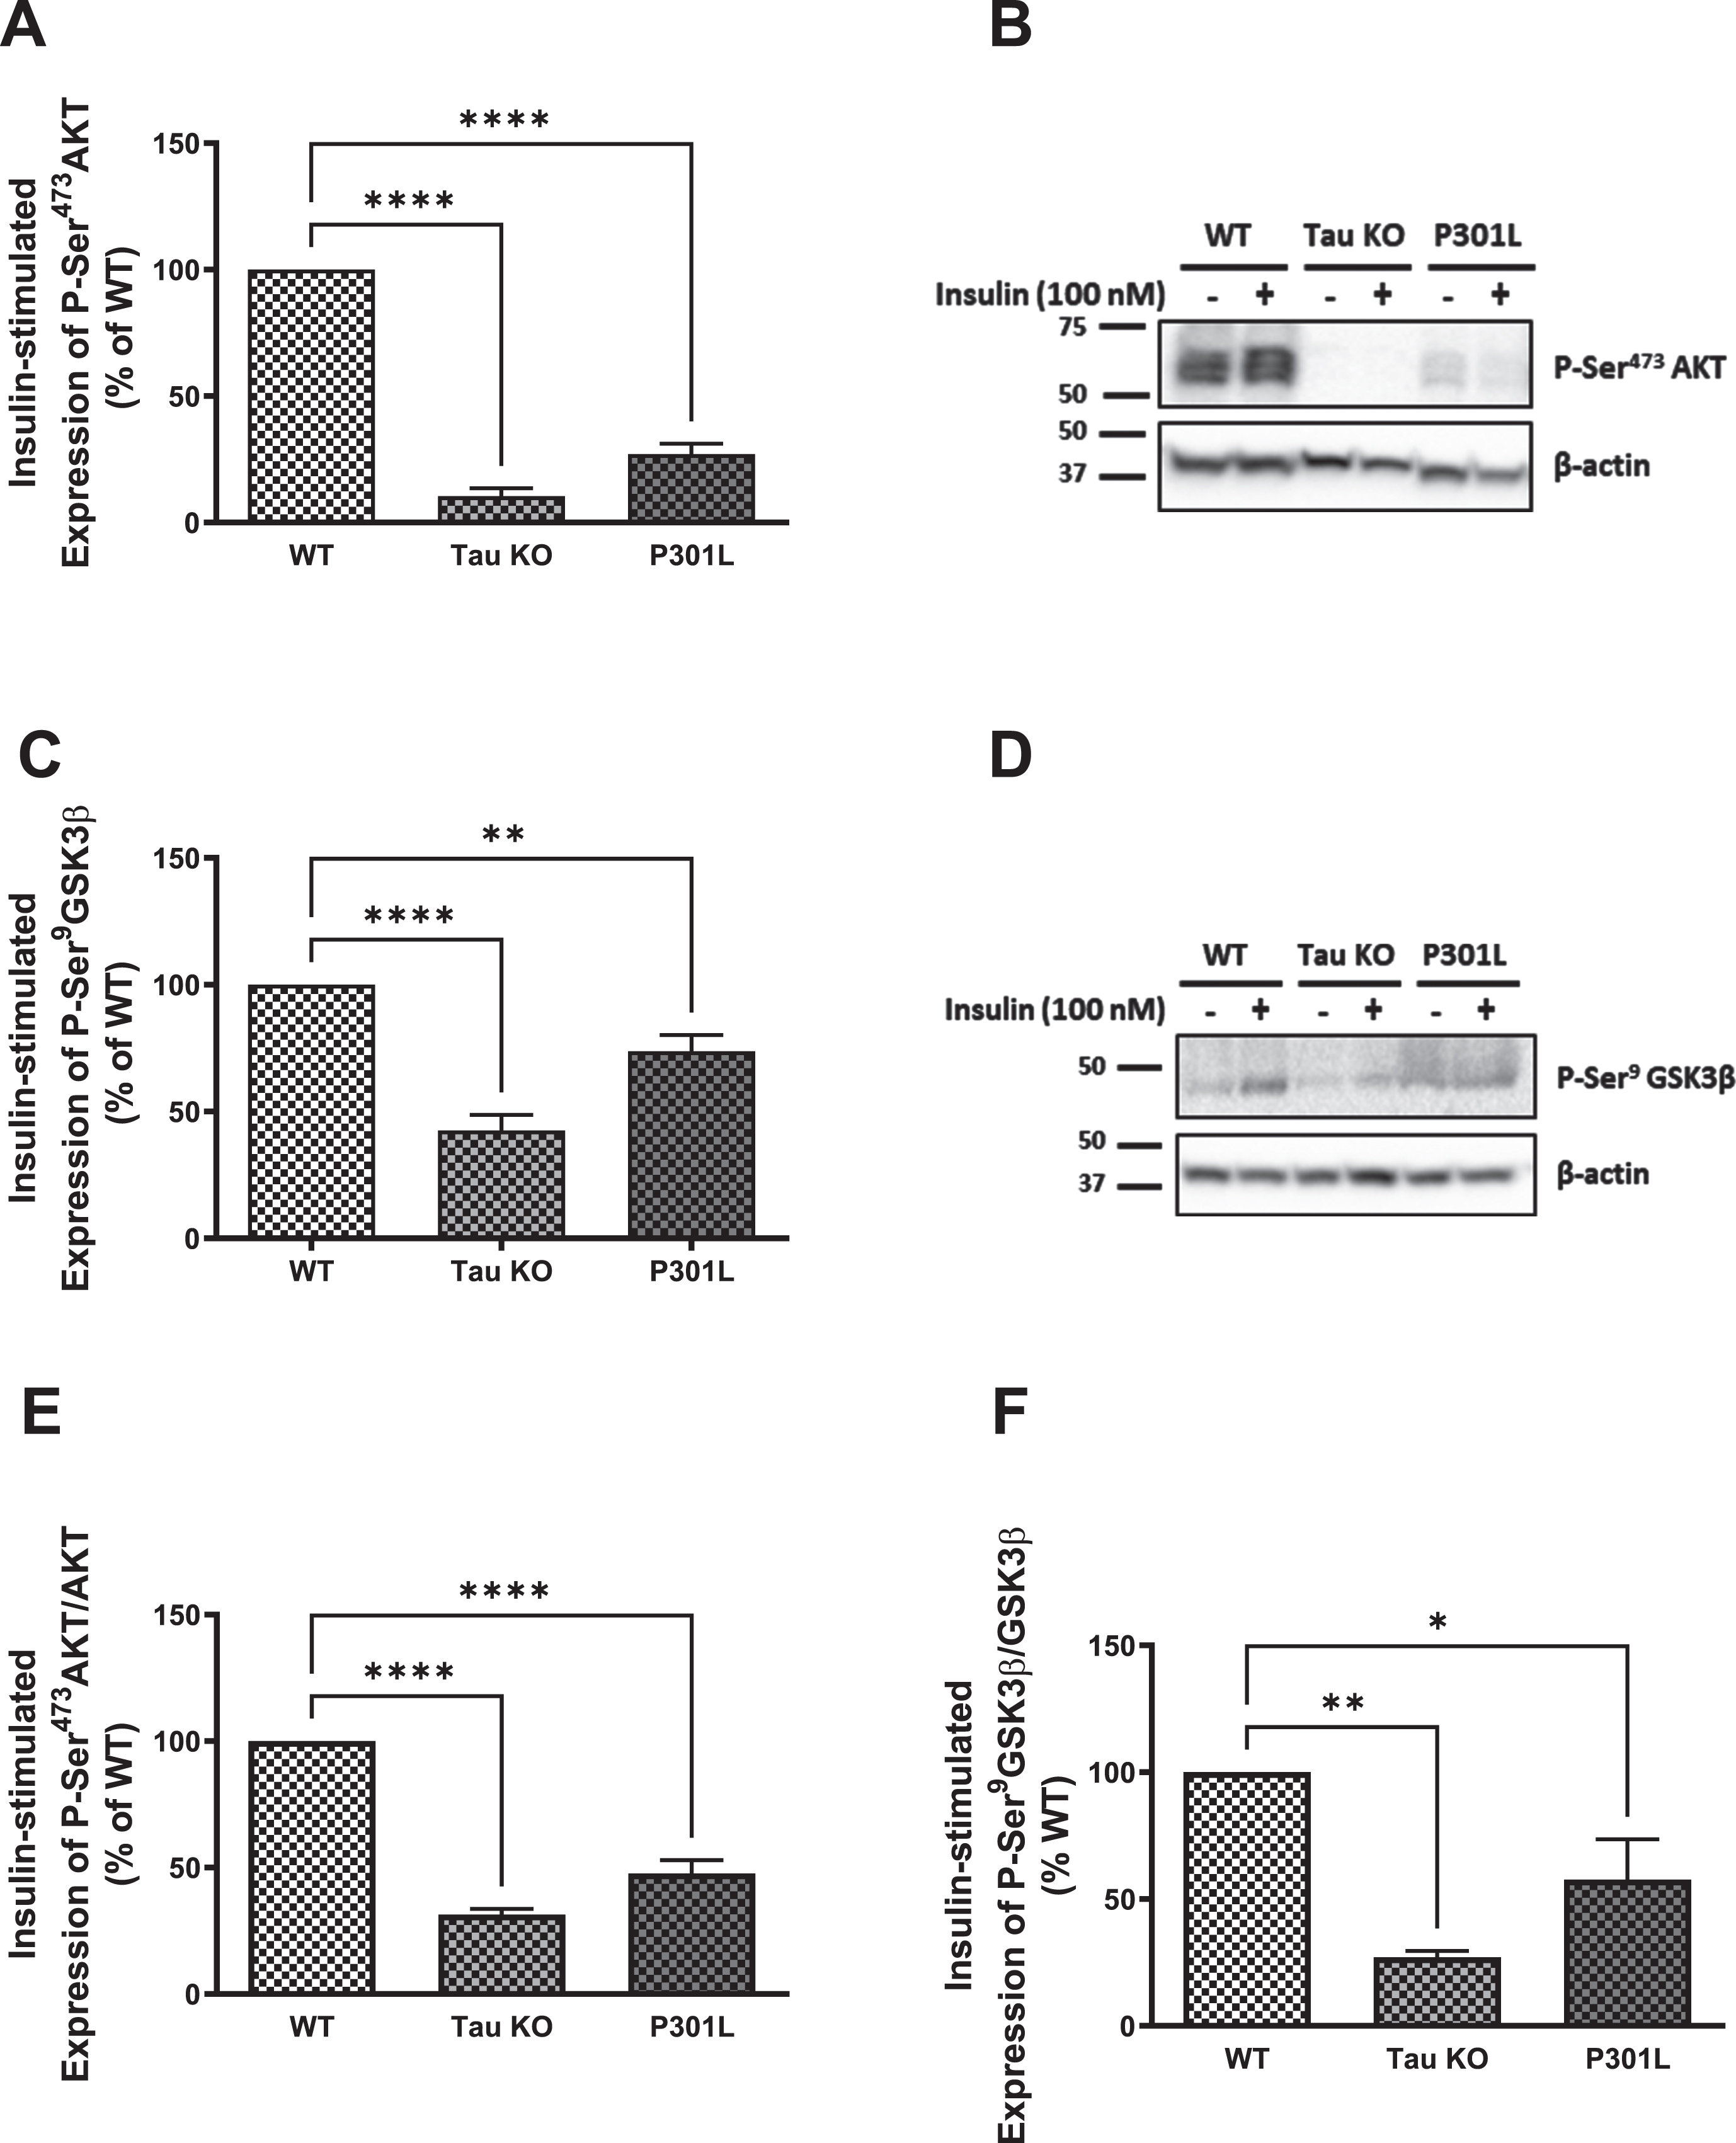 Tau loss of function, by deletion or aggregation, induces downregulation of the insulin signaling pathway in primary mouse hepatocytes. WB: A) primary hepatocytes isolated form 10 months Tau KO and P301L mice show significantly reduced insulin-stimulated P-Ser473AKT expression compared to wild type hepatocytes. Data represent mean±SEM of 3 mice; B) Corresponding gel for A. C) primary hepatocytes isolated form 10 months Tau KO and P301L mice show significantly reduced insulin-stimulated P-Ser9GSK3β expression compared to wild type hepatocytes. Data represent mean±SEM of 5 (WT, TauKO), or 4 (P301L) mice. D) Corresponding gel for C. The antibodies specifically detected AKT-Ser473 and GSK3β-Ser9 phosphorylation. ELISA: primary hepatocytes isolated form Tau KO and P301L mice show significantly reduced insulin-stimulated P-Ser473AKT (E) and P-Ser9GSK3β (F) compared to wild type hepatocytes. Data represent mean±SEM of 3 mice, each with two experimental replicates. *p < 0.05, **p < 0.01, ****p < 0.0001; One-way ANOVA, Dunnett’s post hoc test.